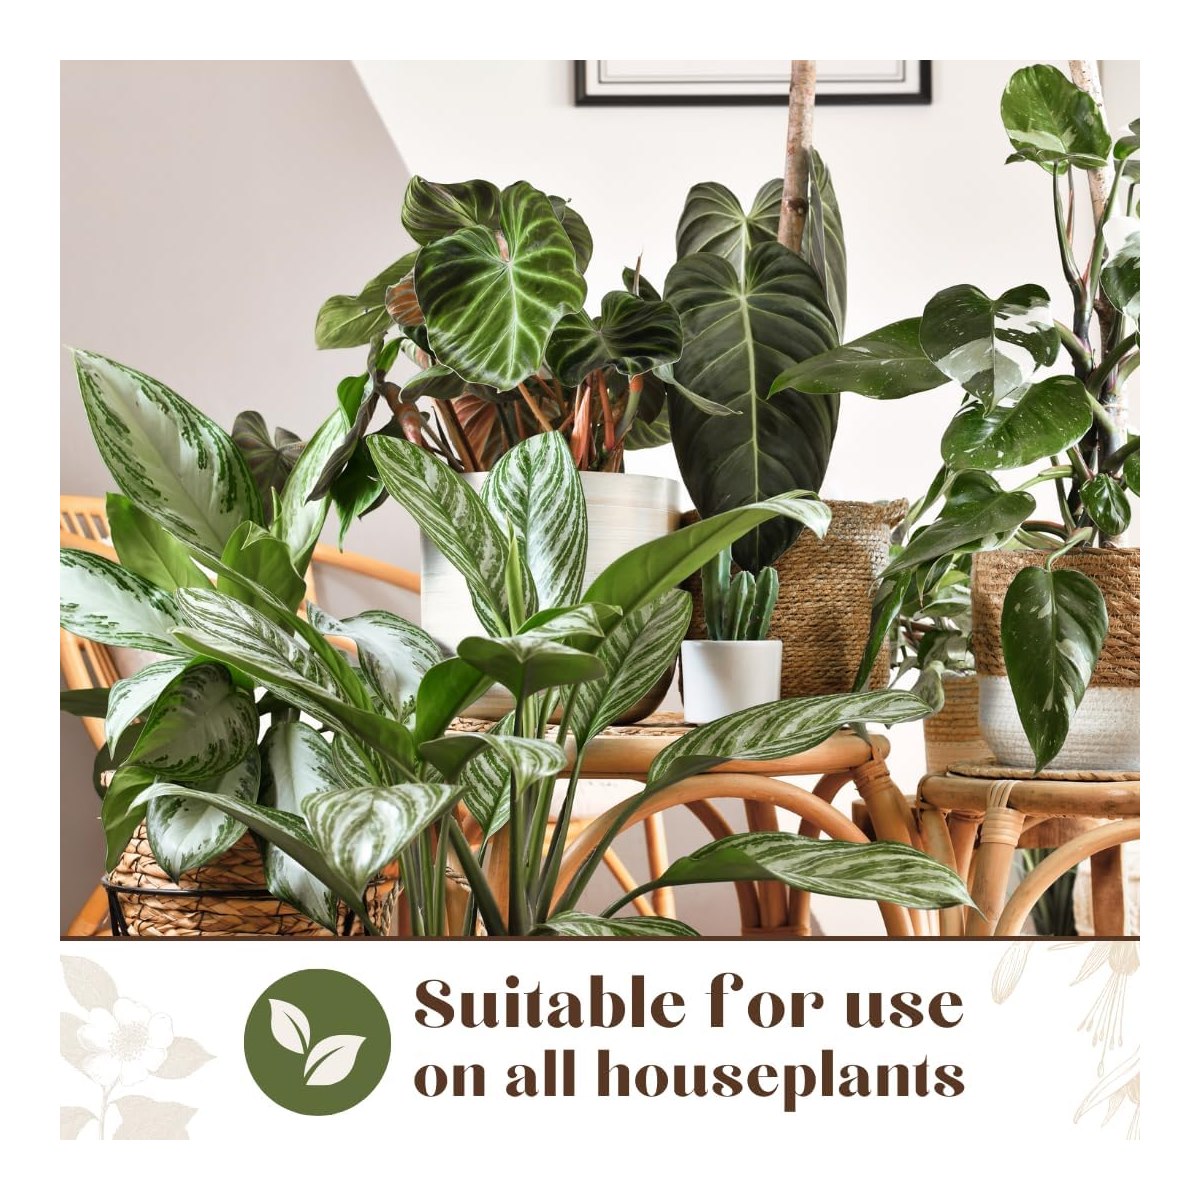 Best Spray for pests on houseplants